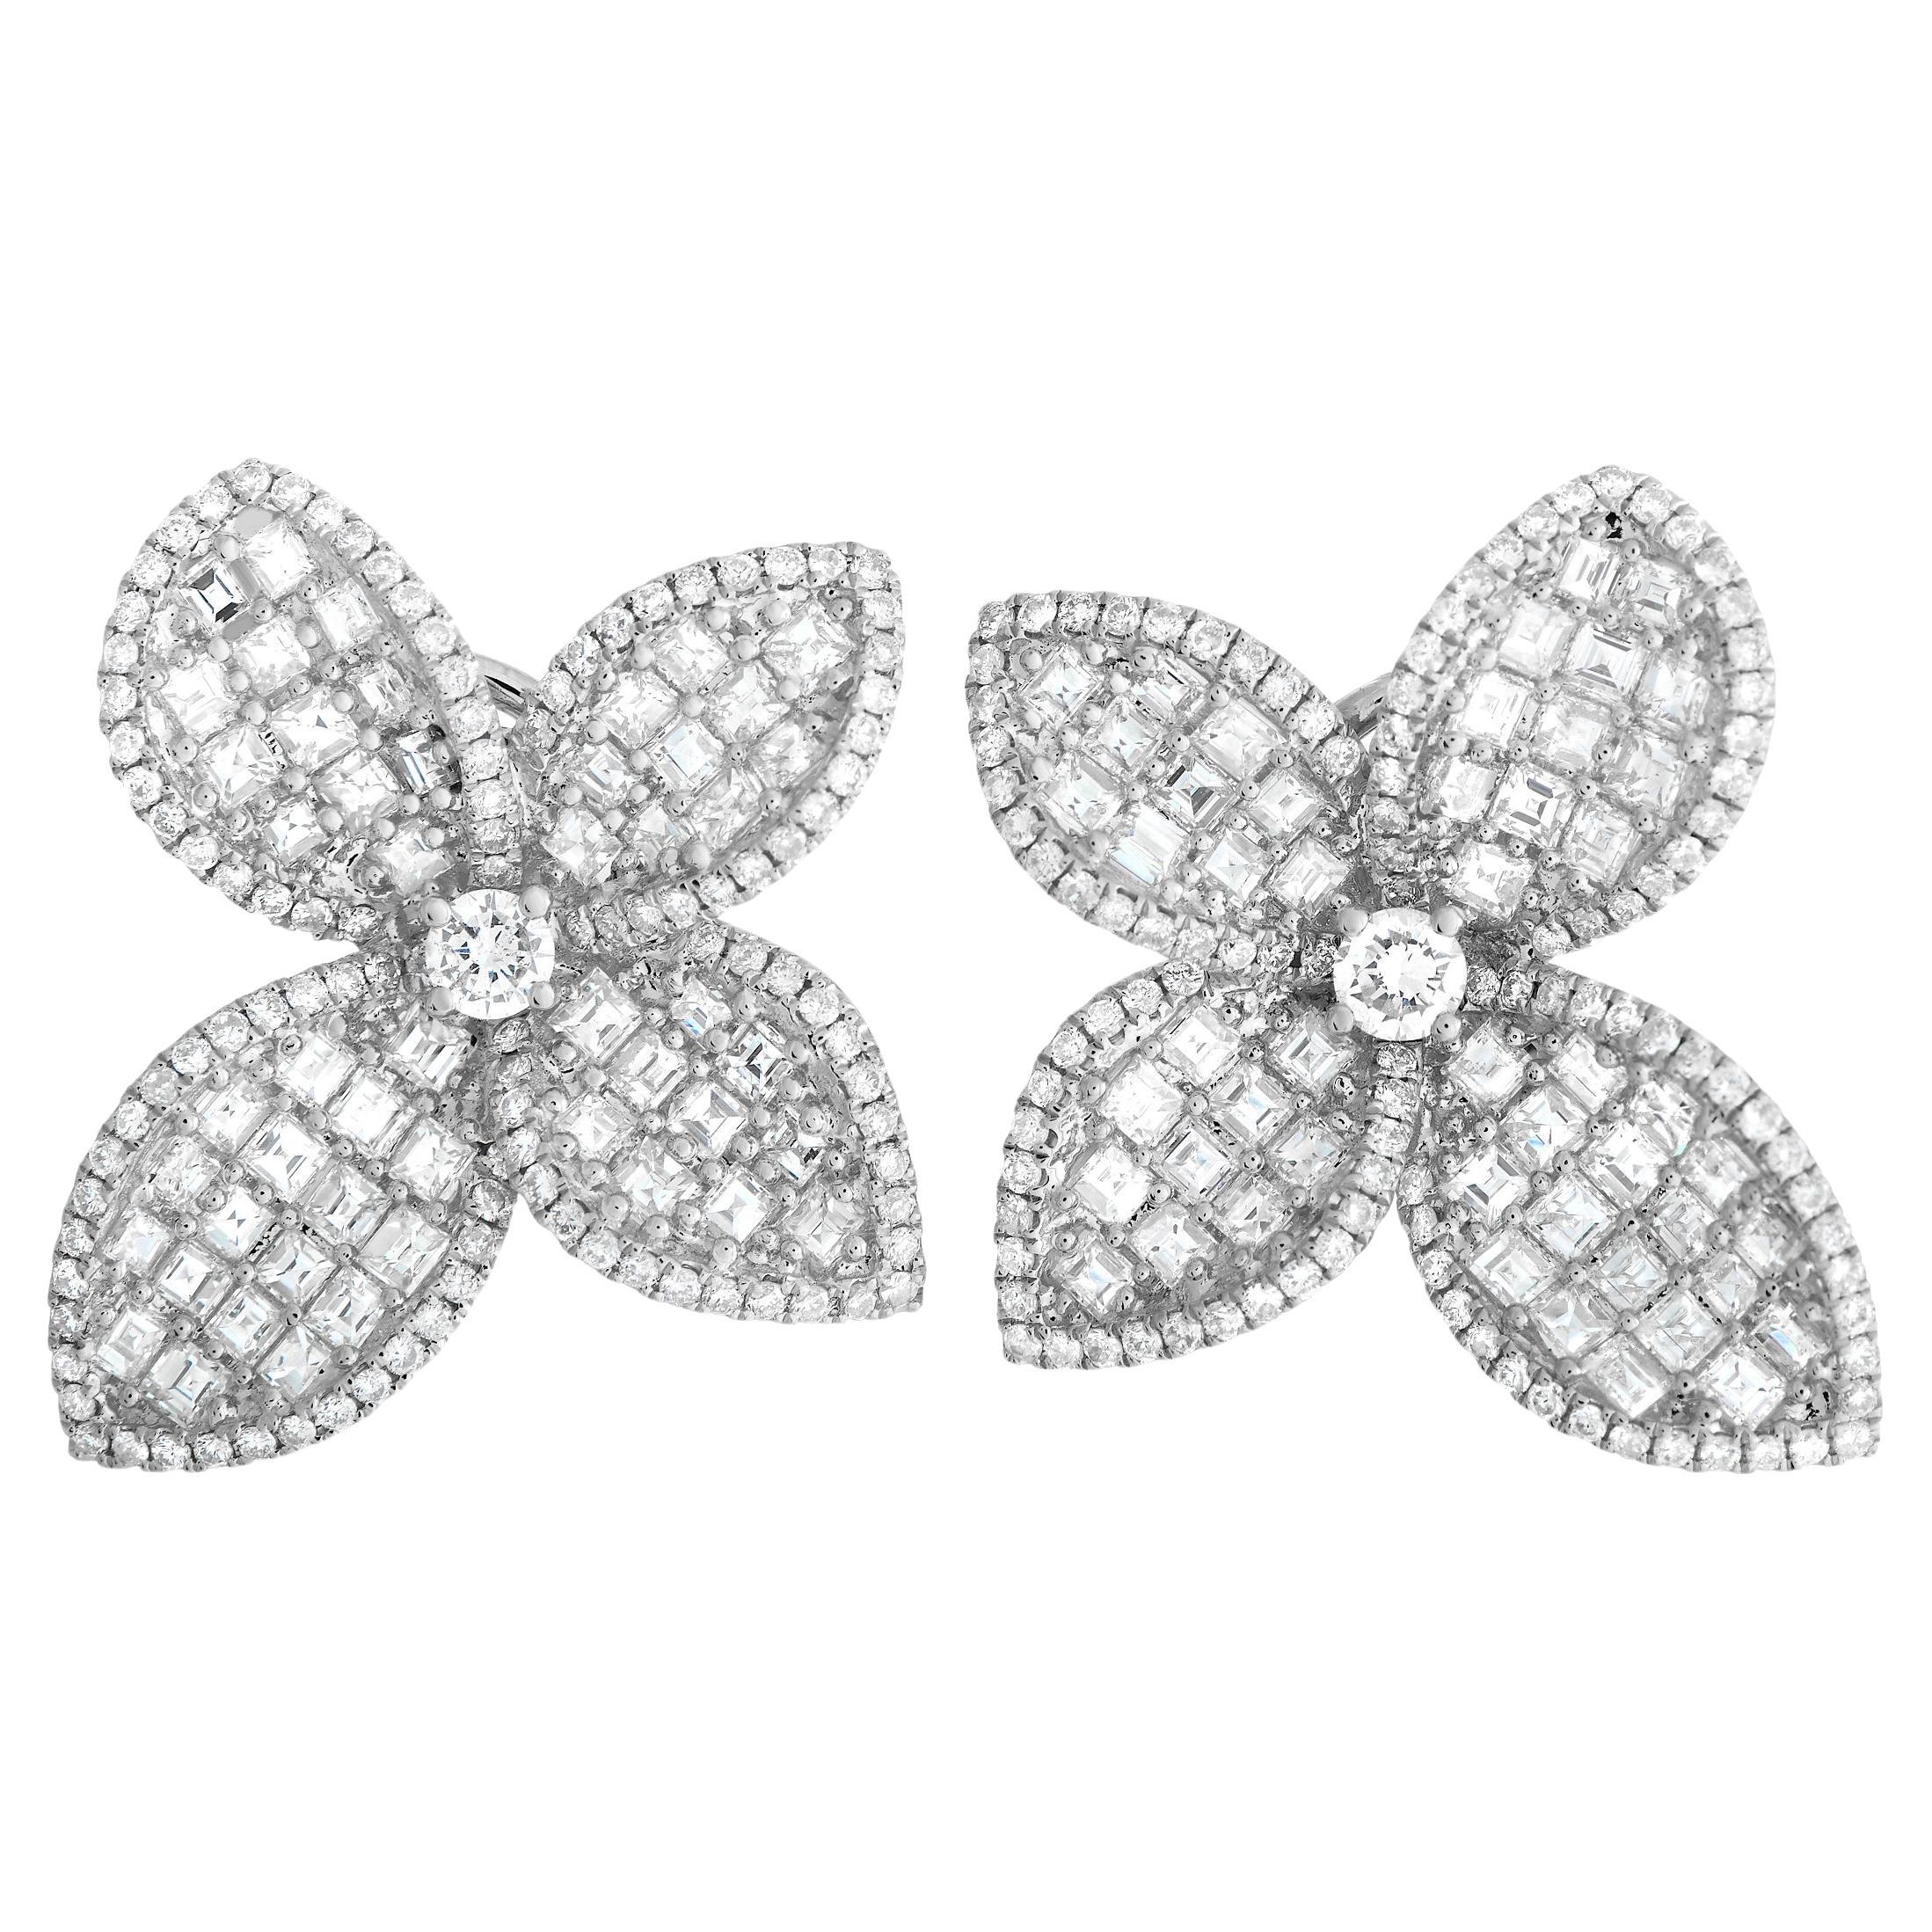 LB Exclusive 18K White Gold 4.95ct Diamond Flower Earrings For Sale